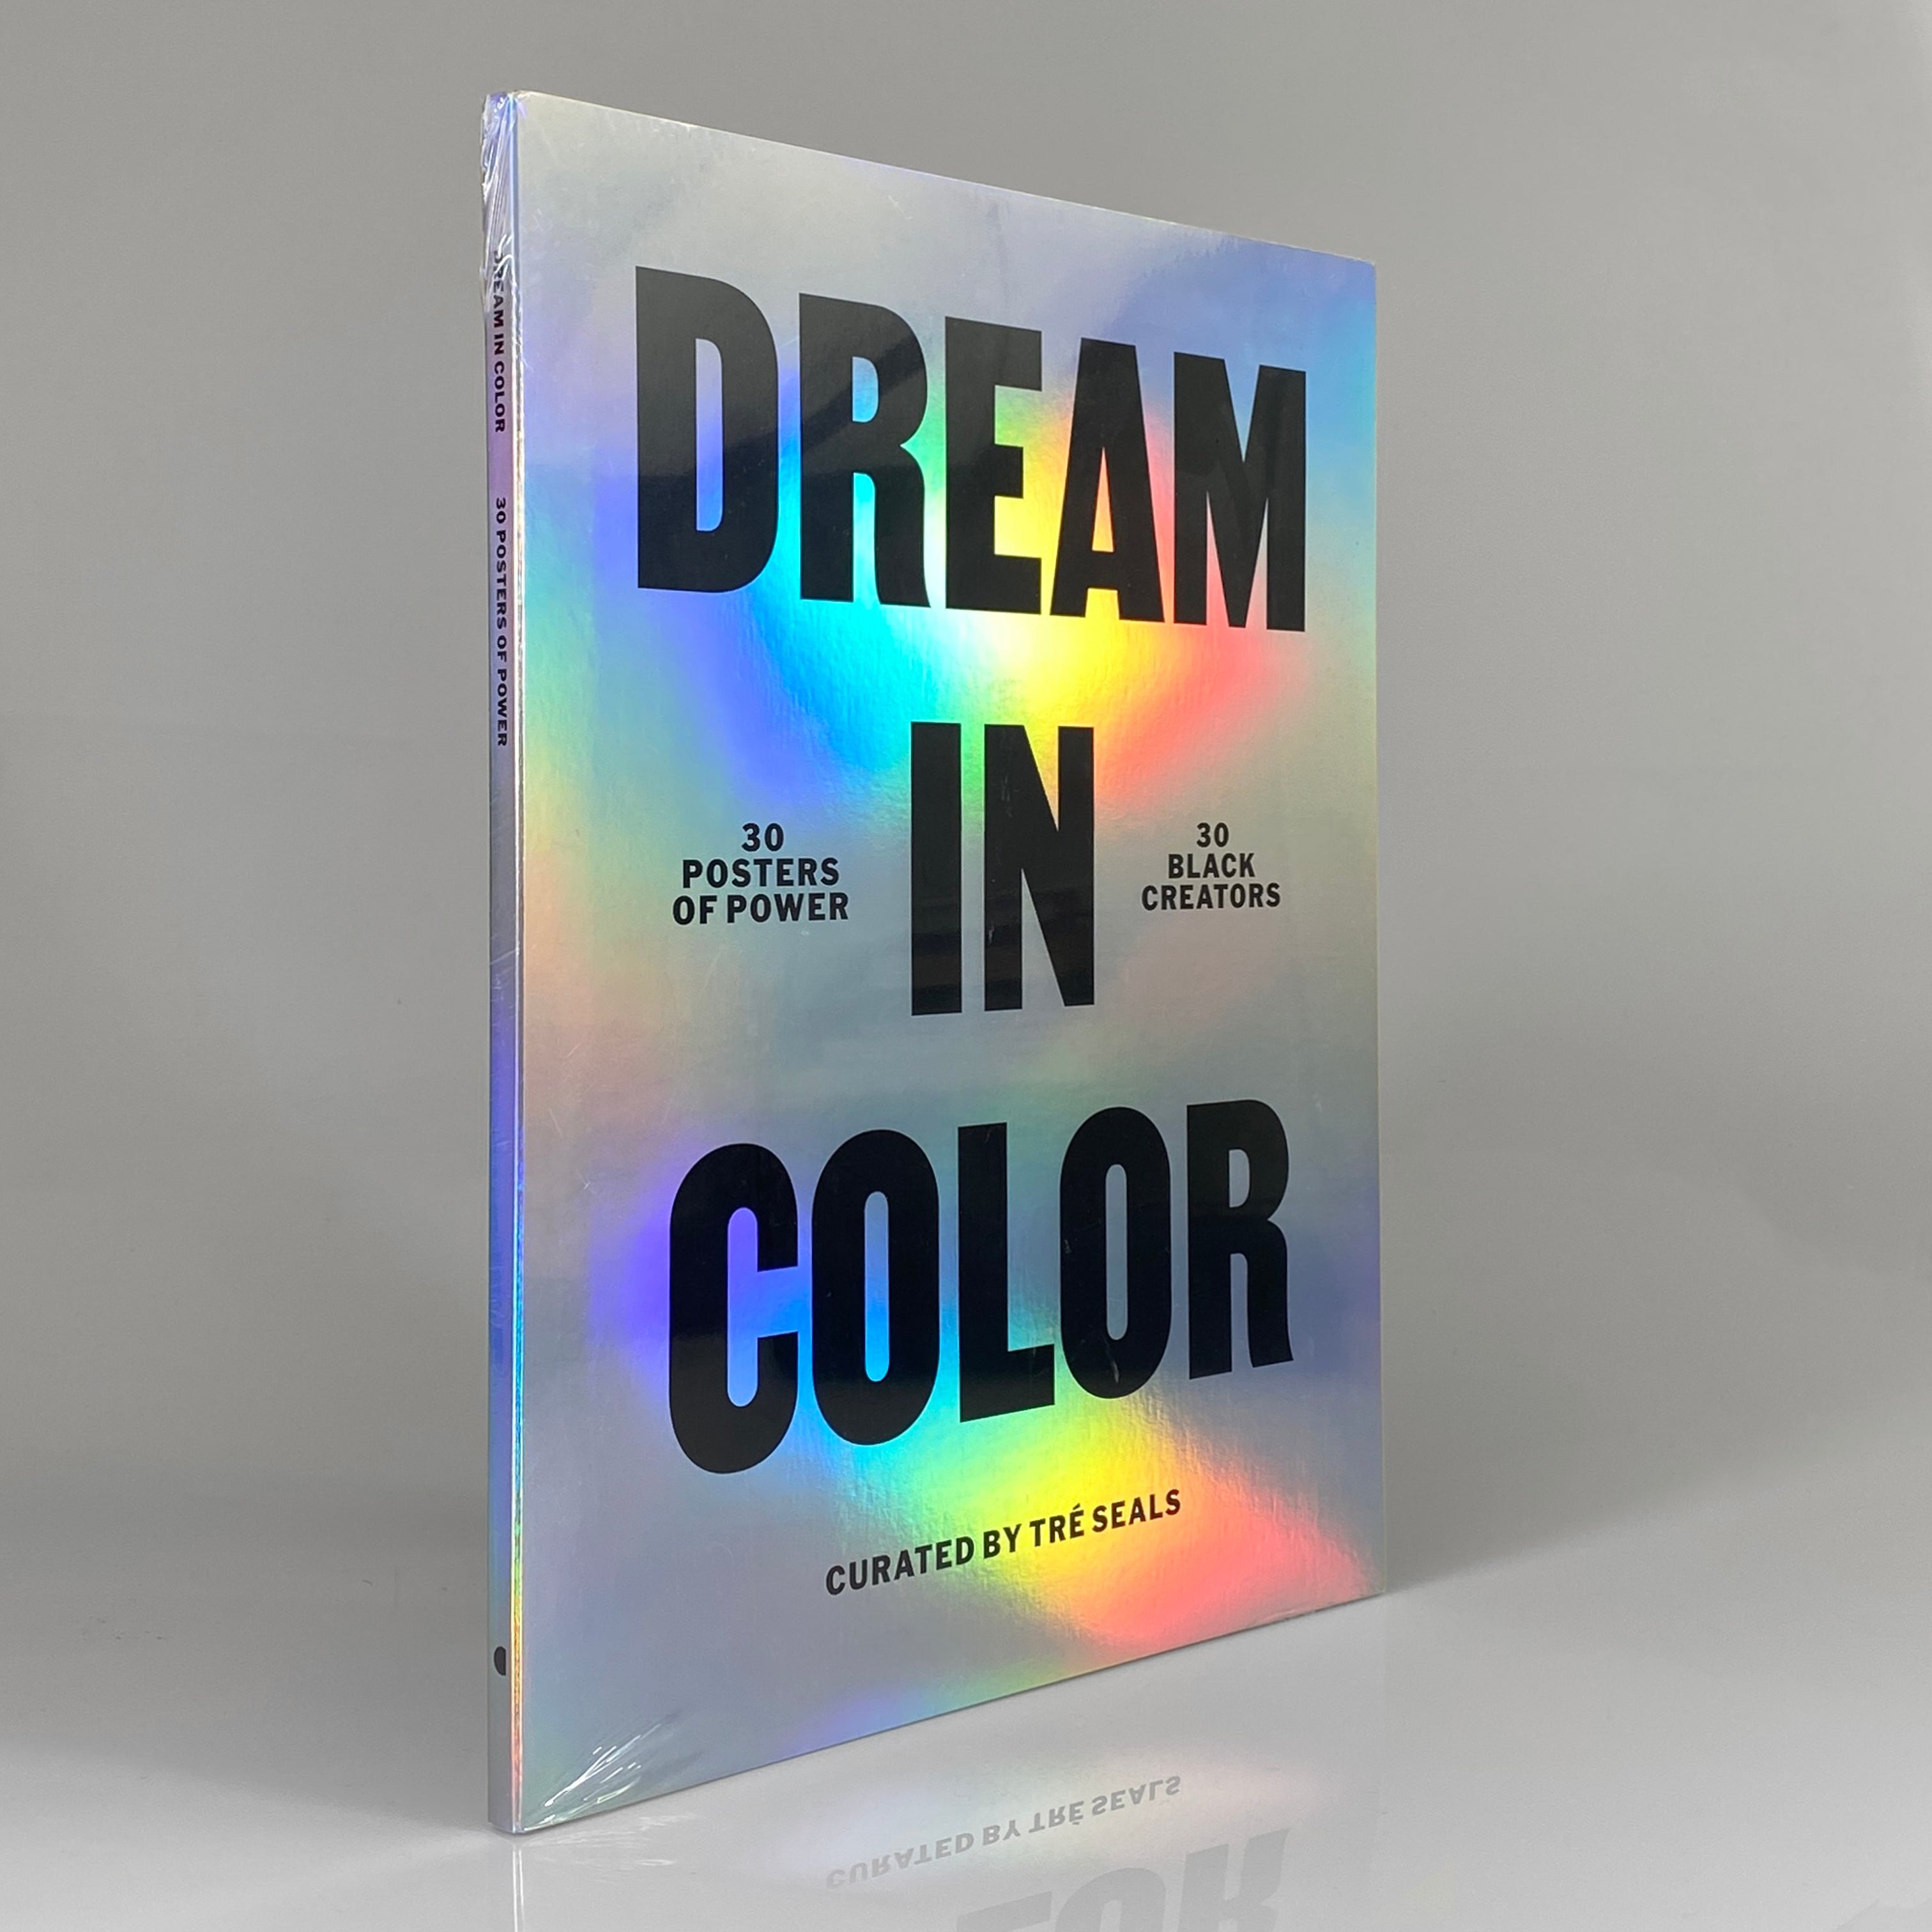 Dream in Color: 30 Posters of Power, 30 Black Creatives [Book]